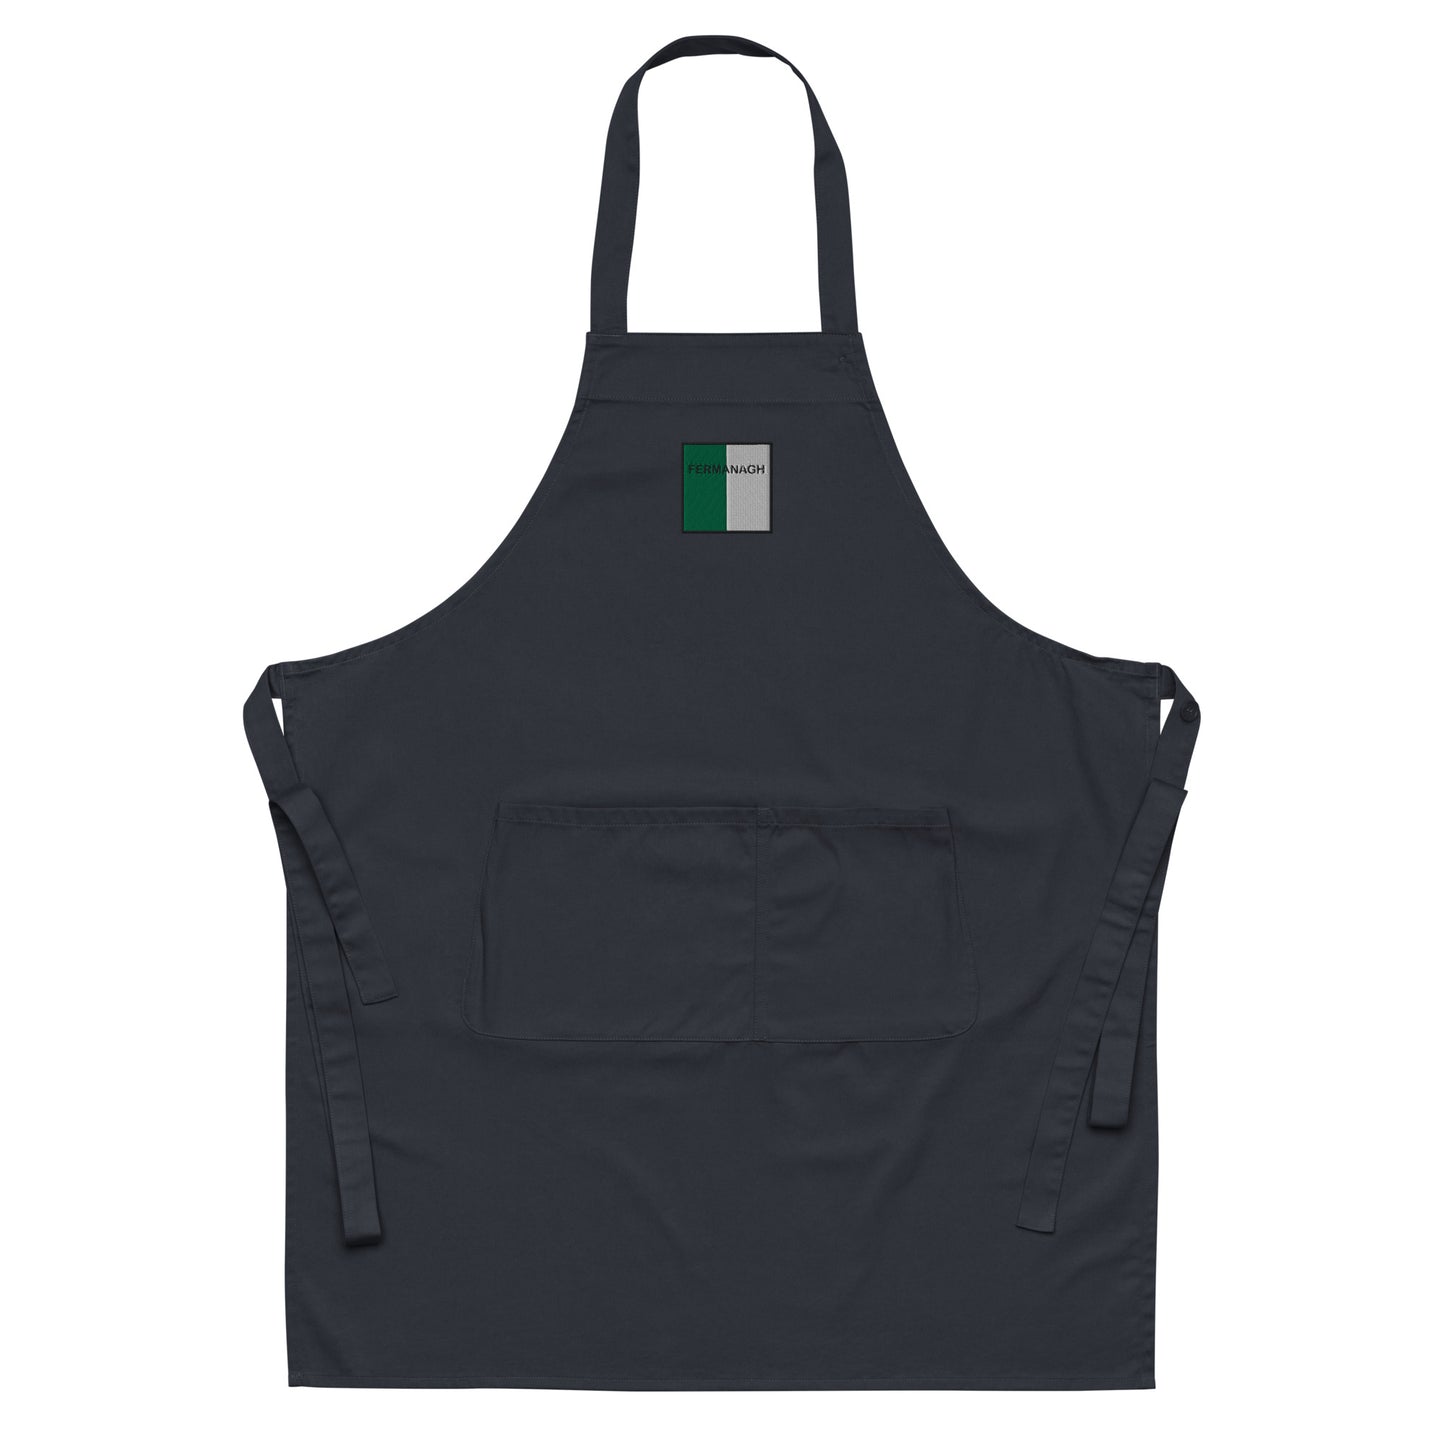 Embroidered Fermanagh Apron - 100% organic cotton